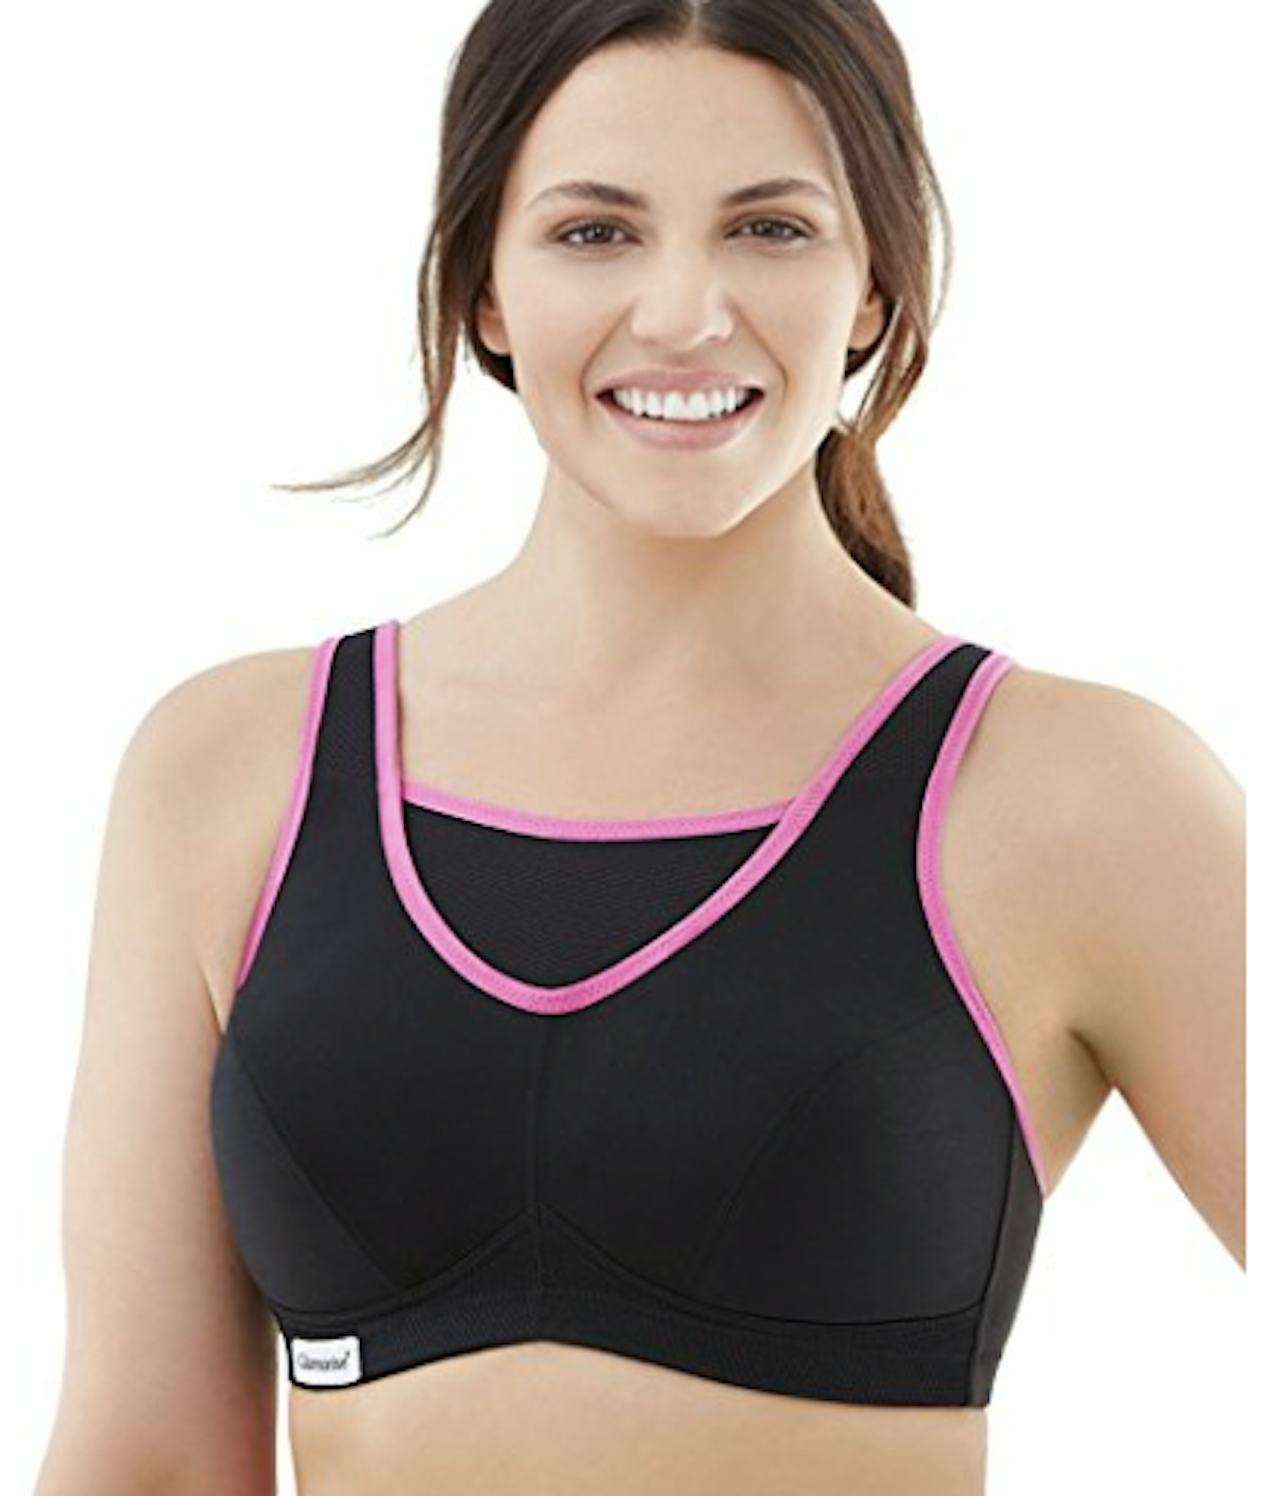 The 7 Best Sports Bras For Running